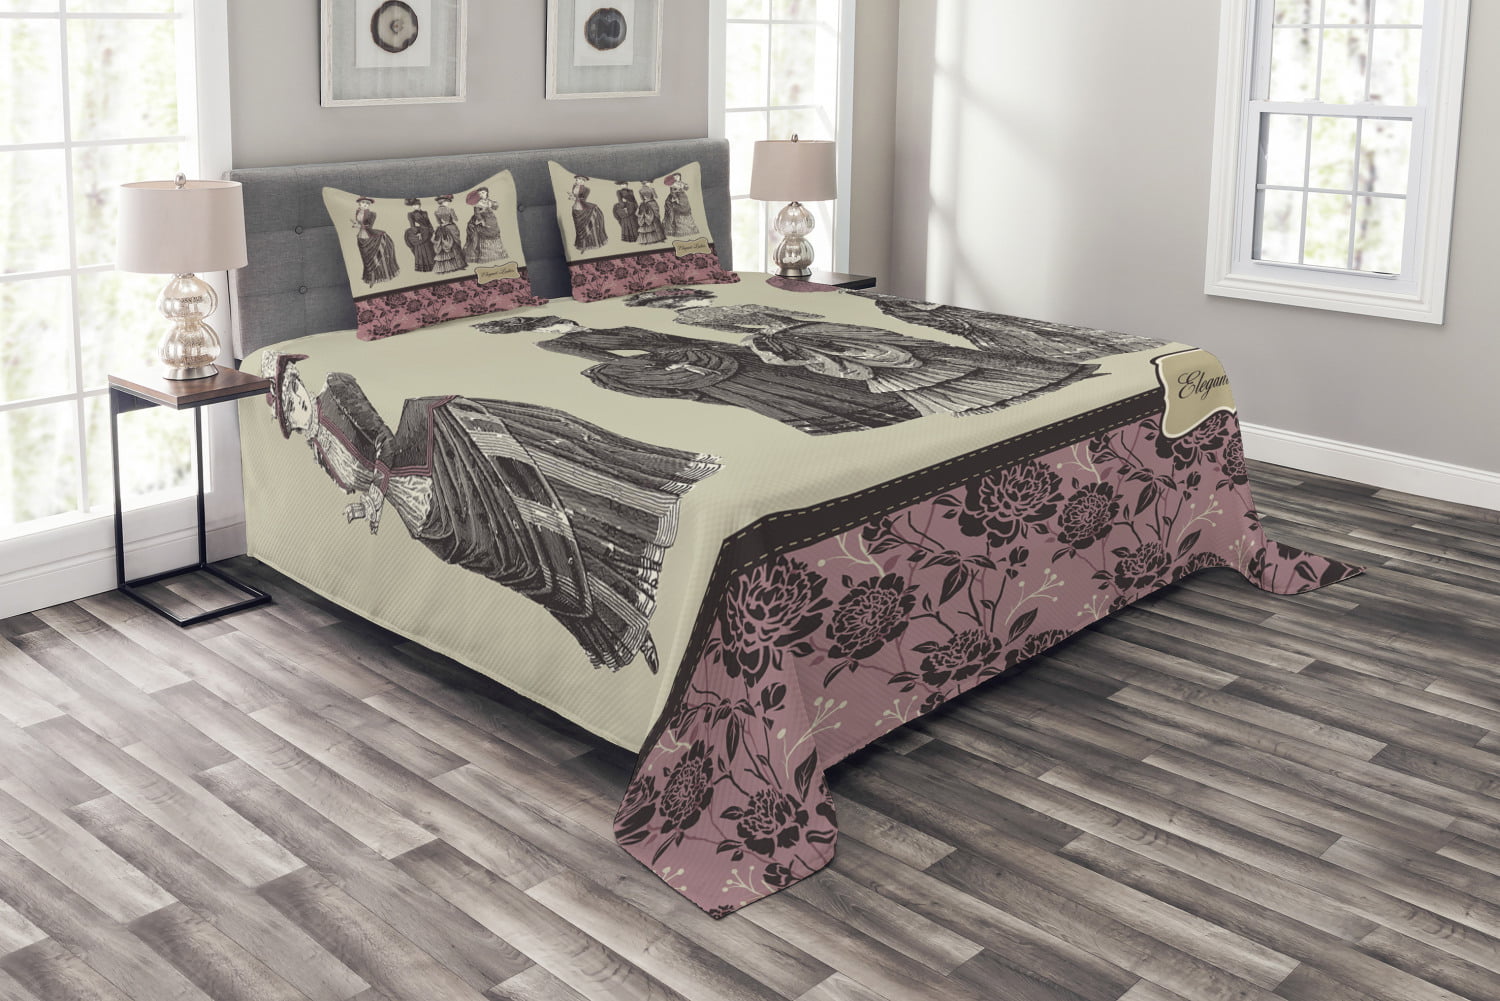 Details about   Henna Quilted Bedspread & Pillow Shams Set Swirls and Leaf Figures Print 